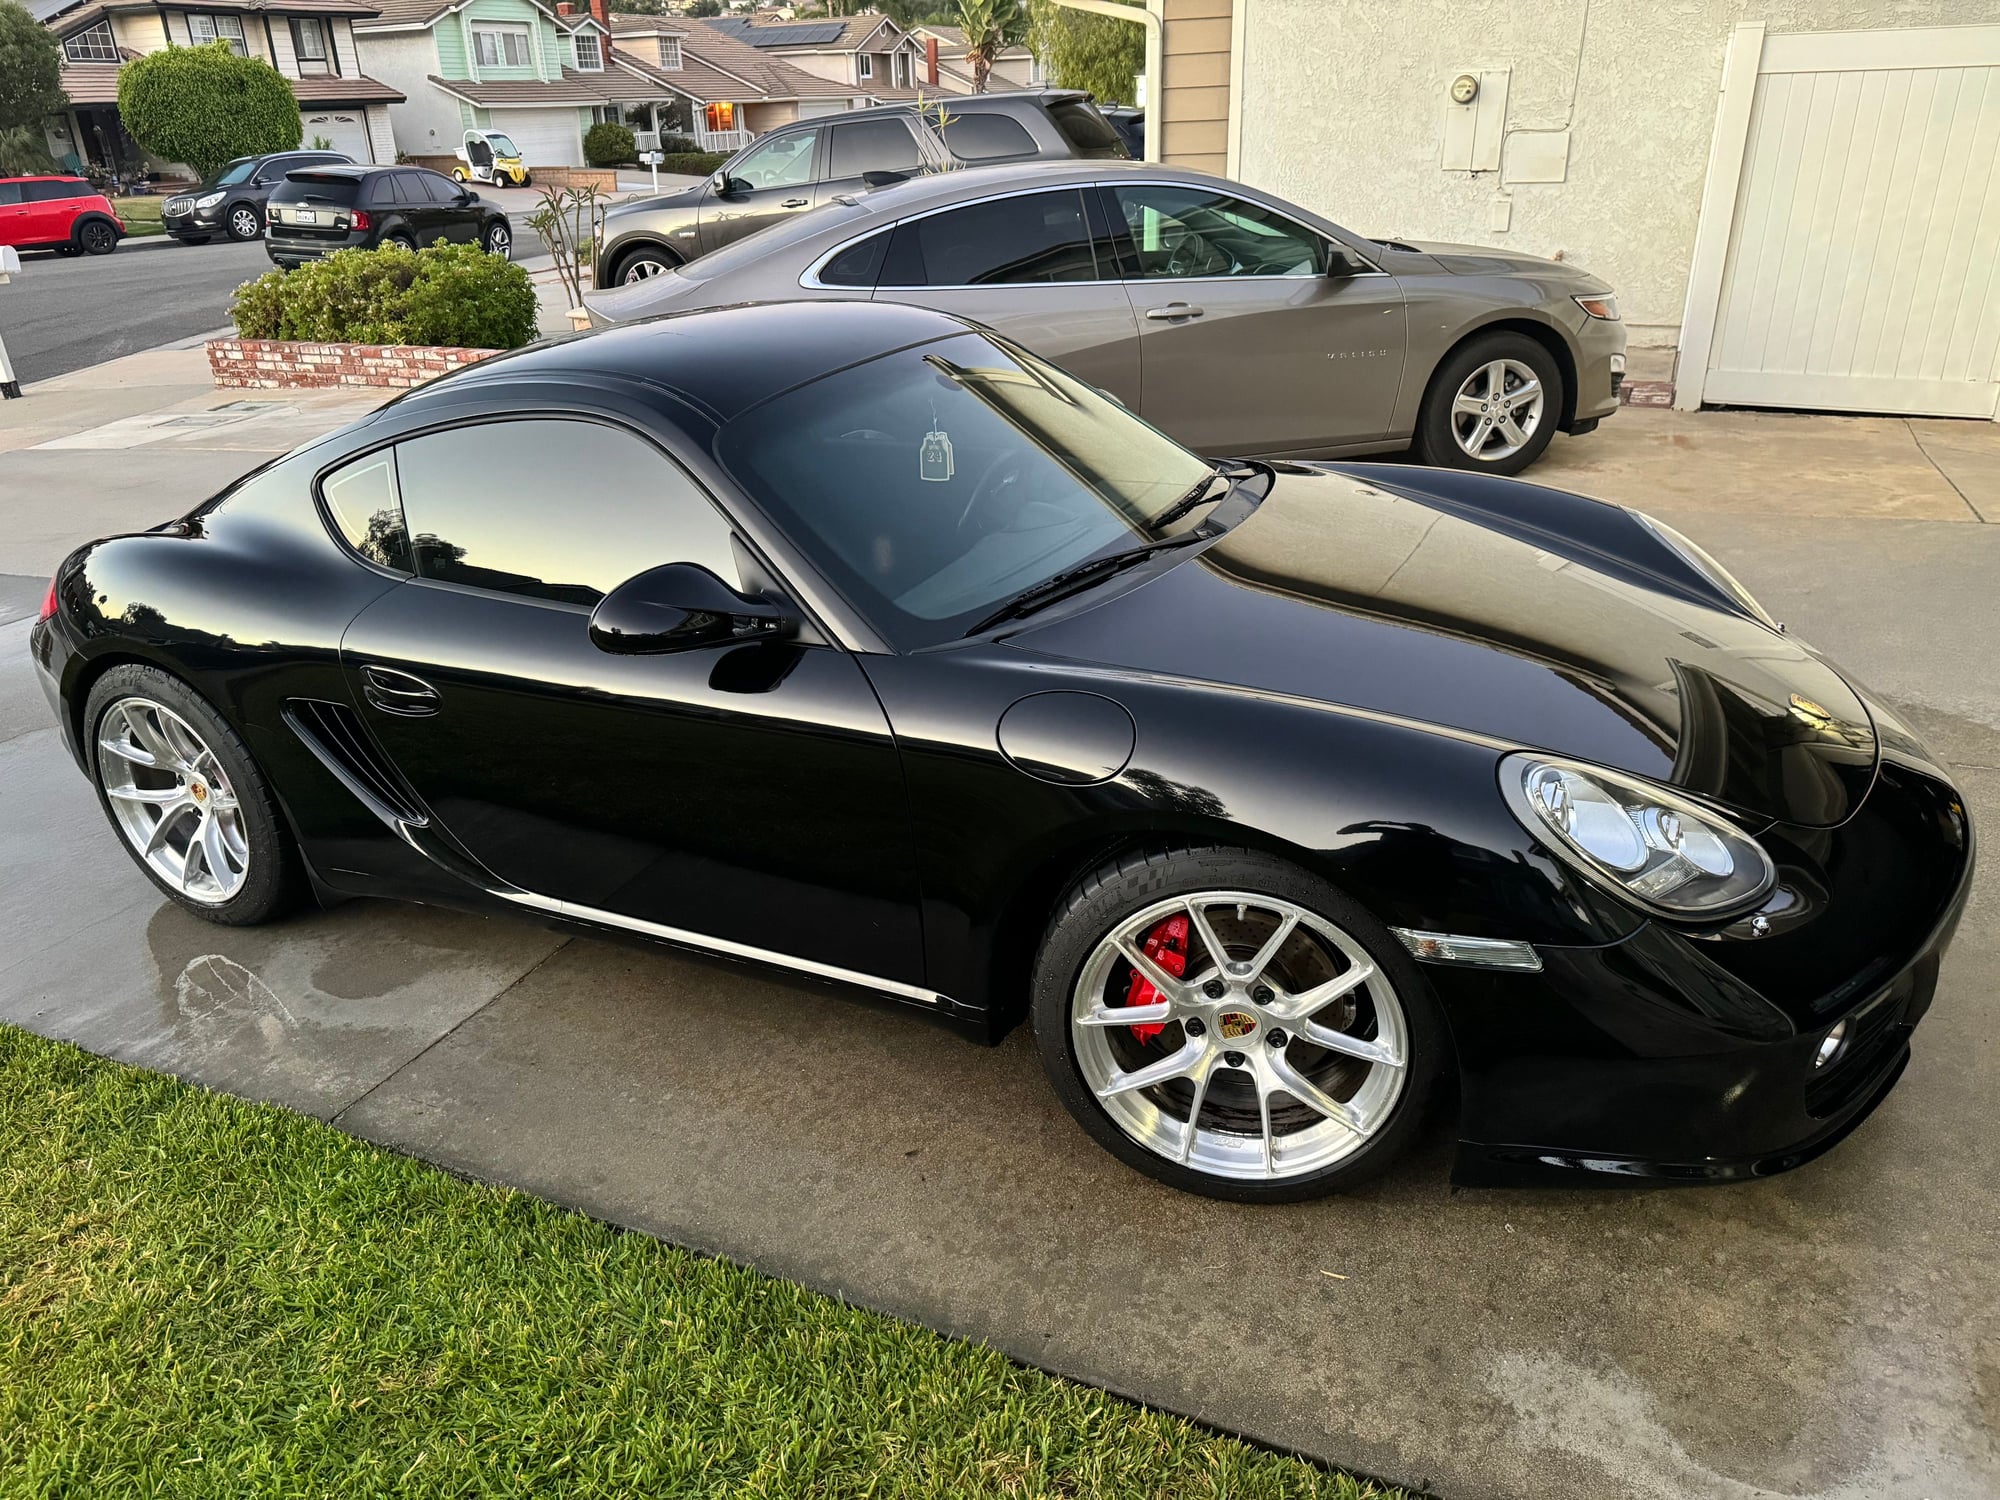 2009 Porsche Cayman - 2009 Porsche Cayman S (Manual) SOCAL - Used - VIN WP0AB29839U780536 - 91,000 Miles - 6 cyl - 2WD - Manual - Coupe - Black - Brea, CA 92886, United States